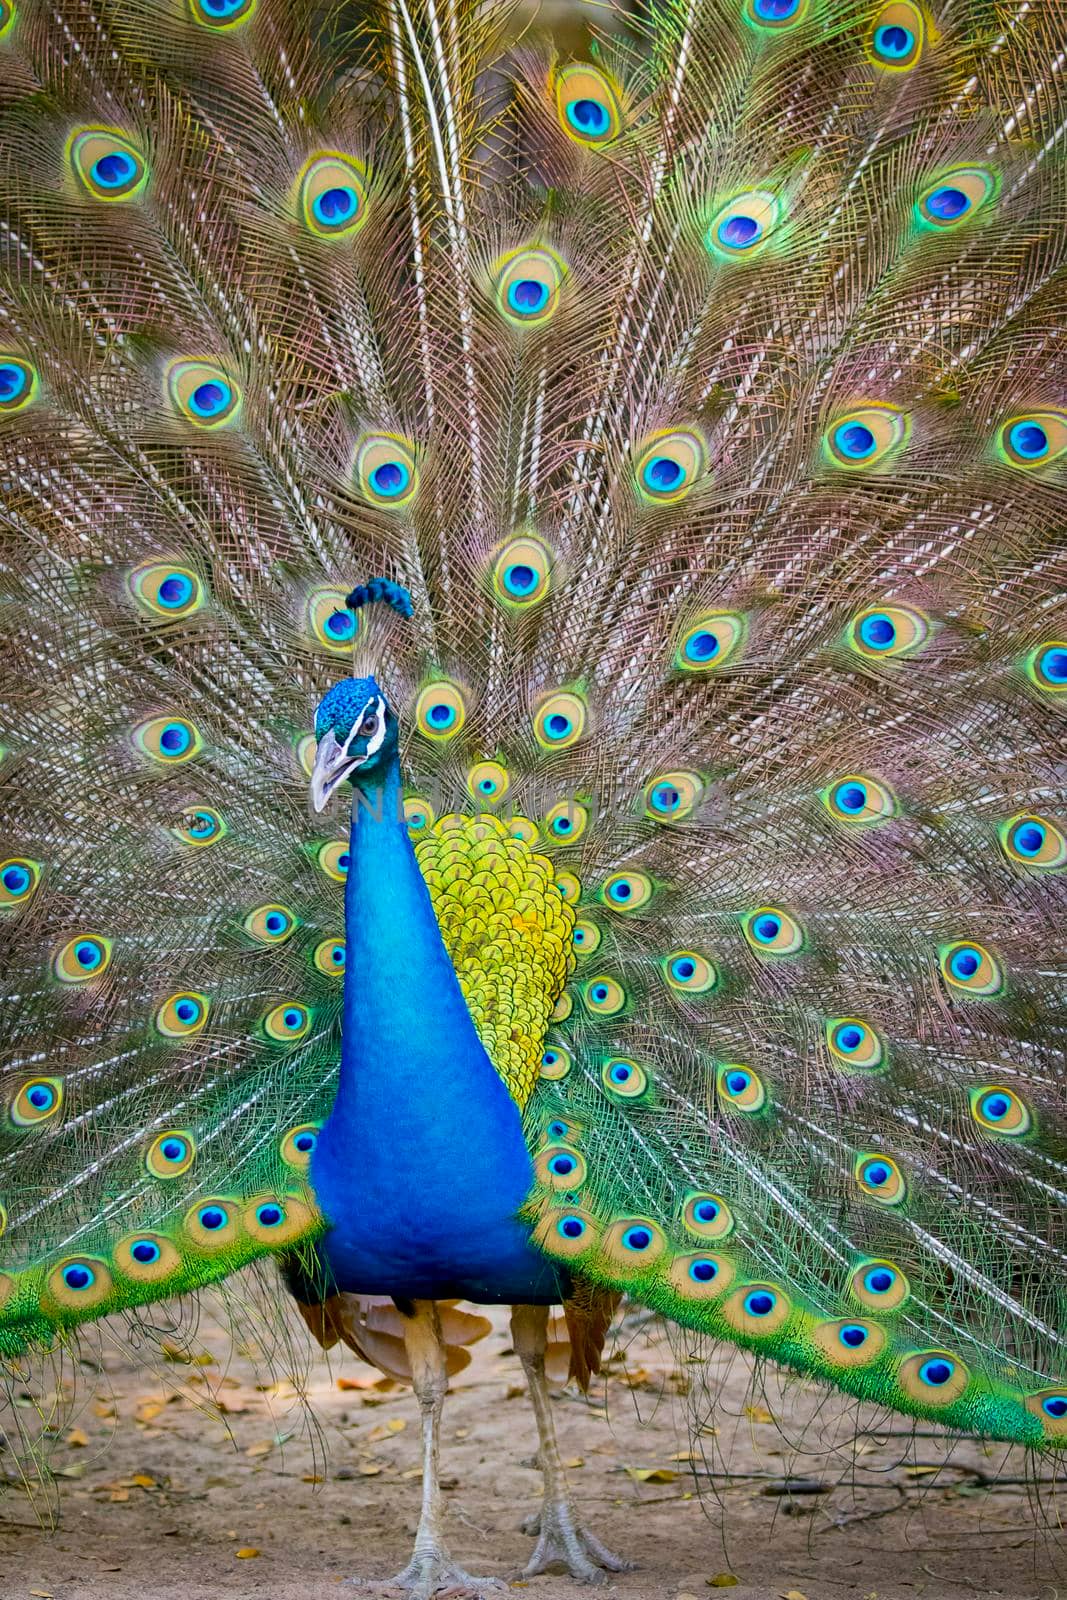 Image of a peacock showing its beautiful feathers. wild animals.